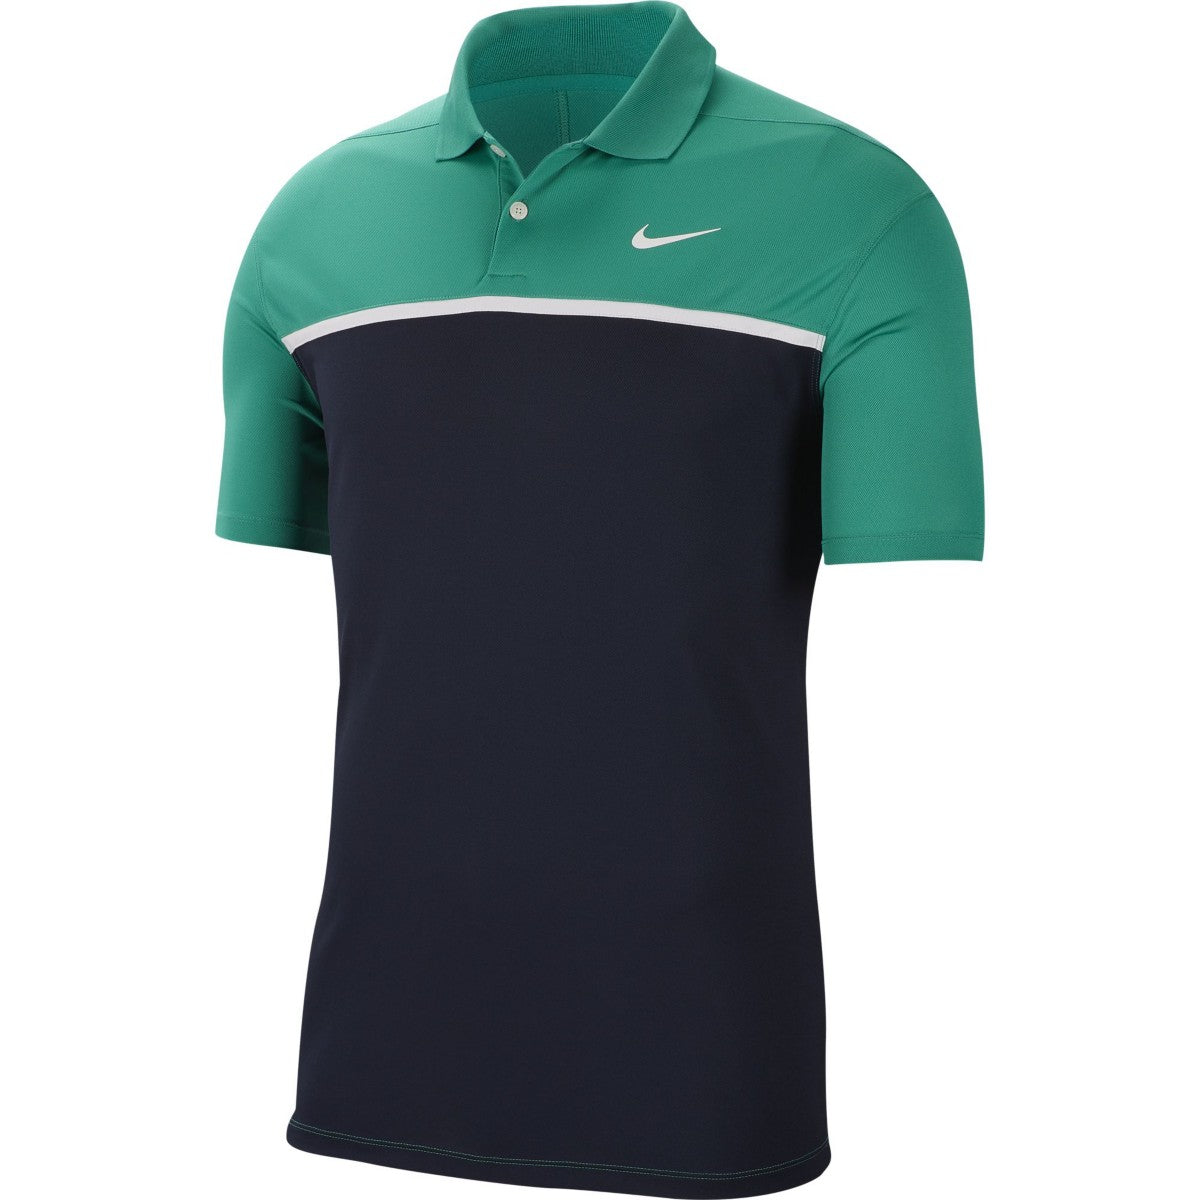 Men's Nike Dri-Fit Victory Color Block Golf Polo | Midway Sports.